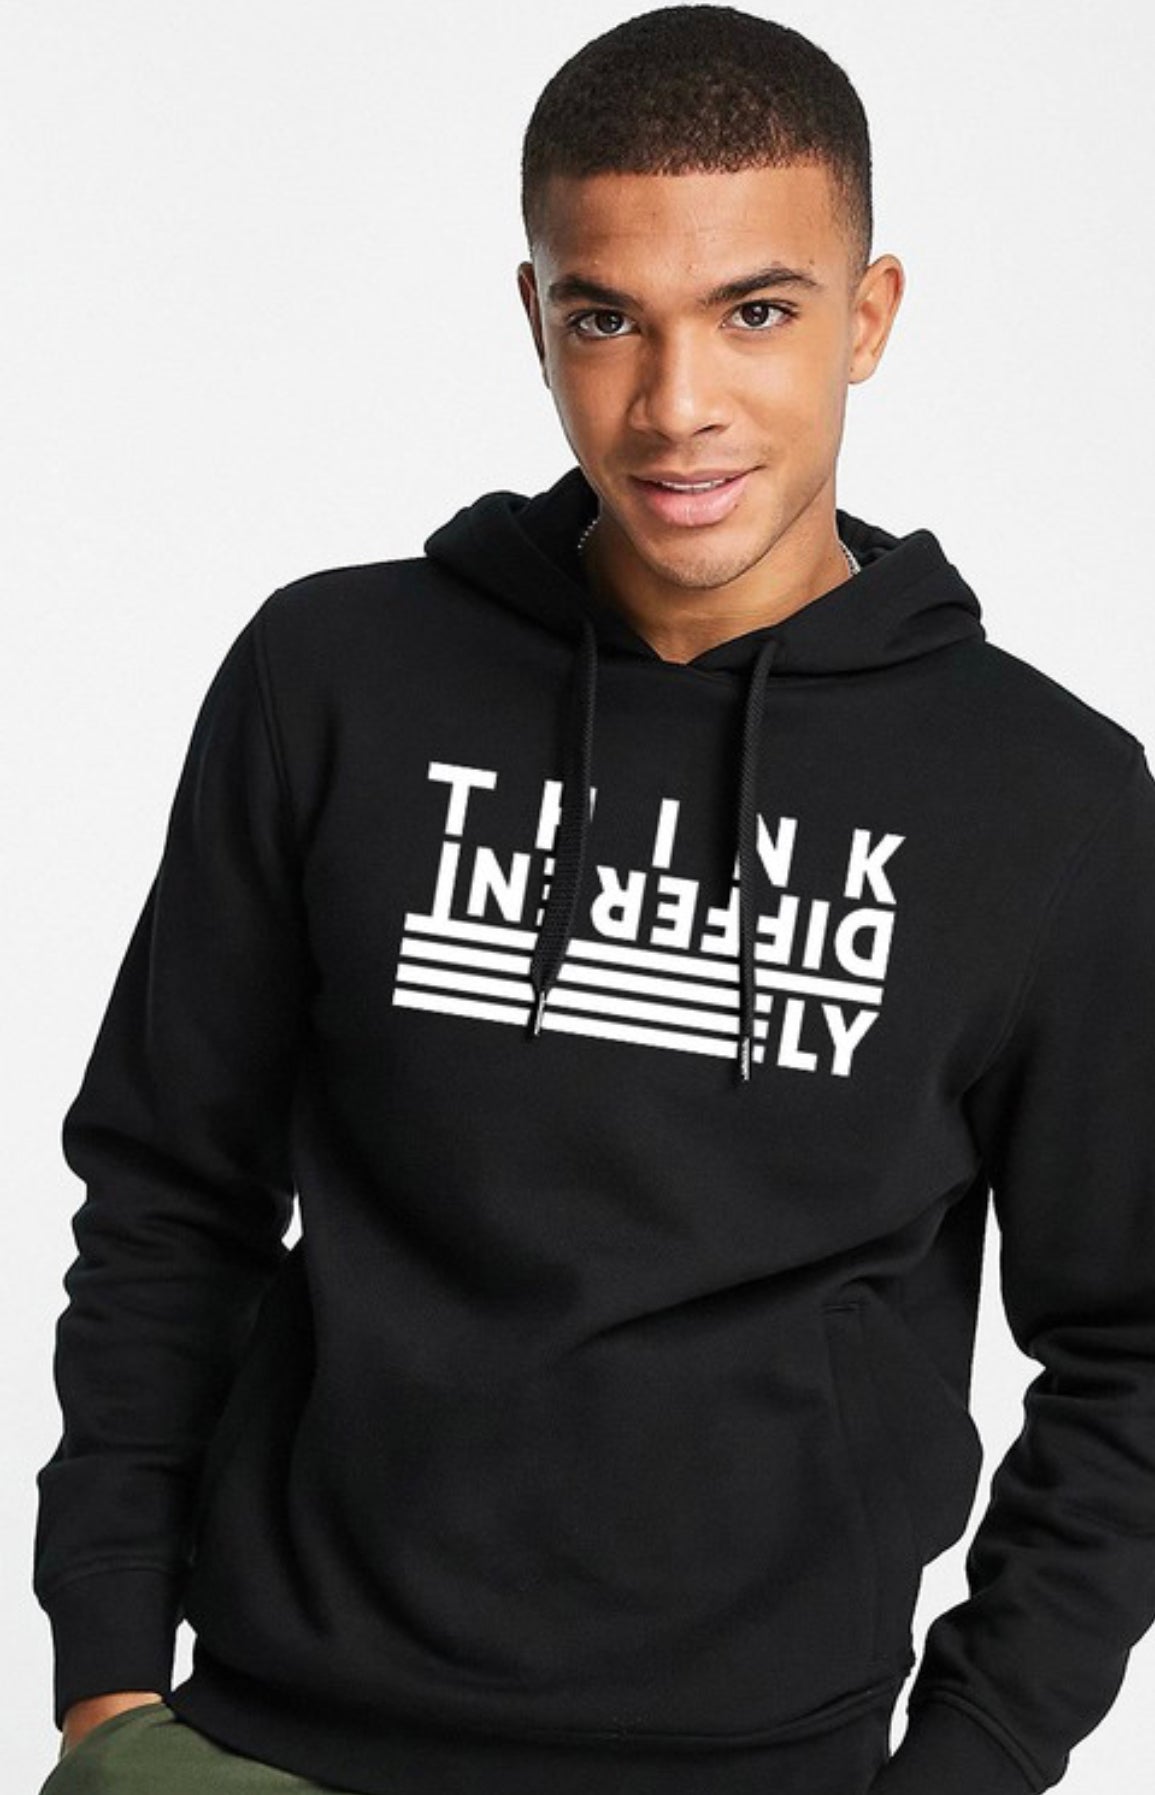 Think Differently Hoodie